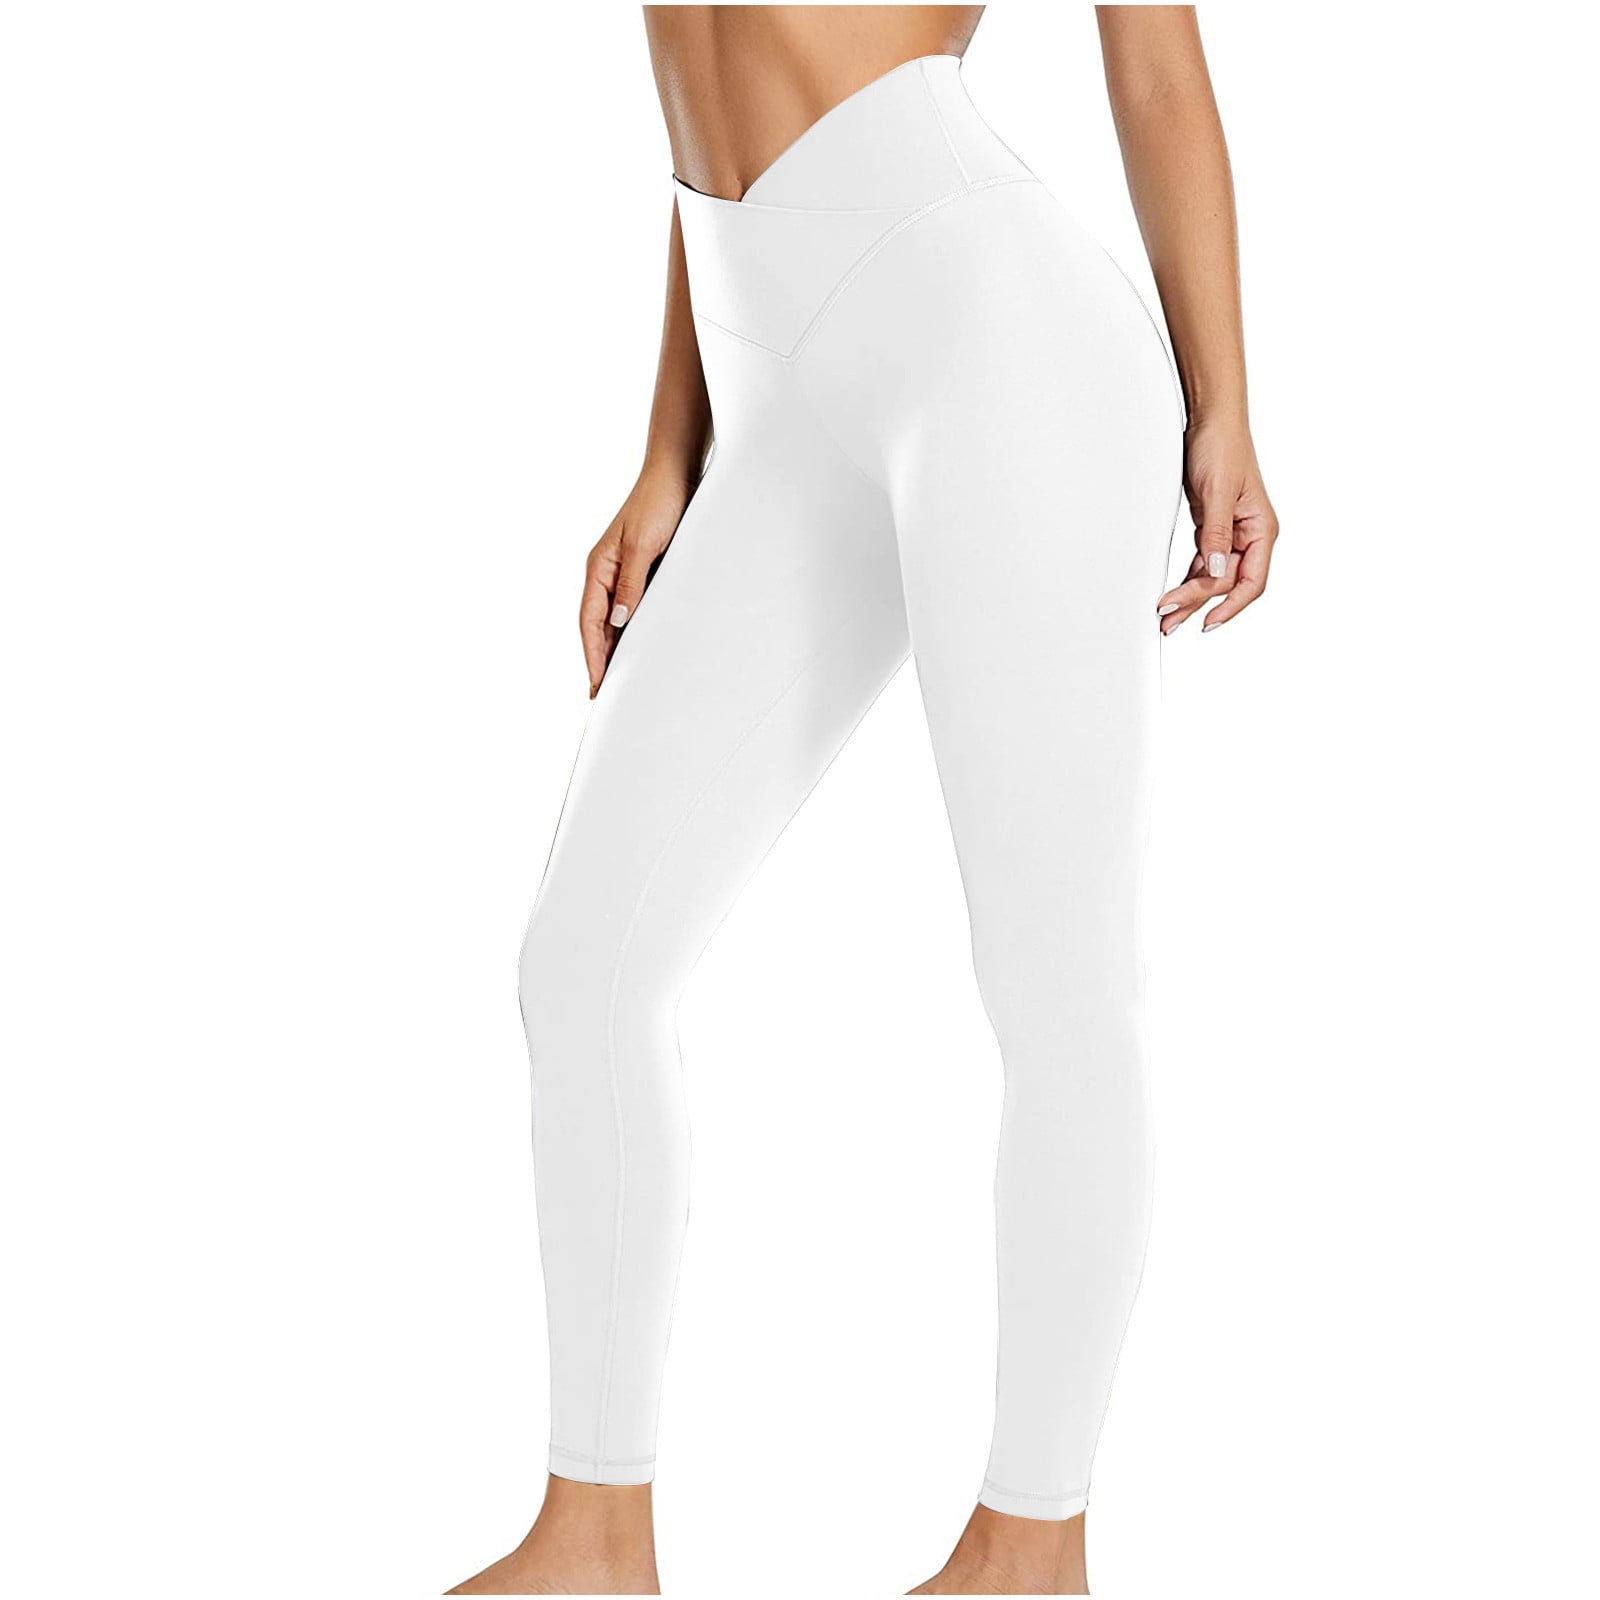 V Crossover Leggings for Women Solid Butt Lifting High Waist Seamless  Workout Yoga Pants Buttery Soft Athletic Pants(XL，White）